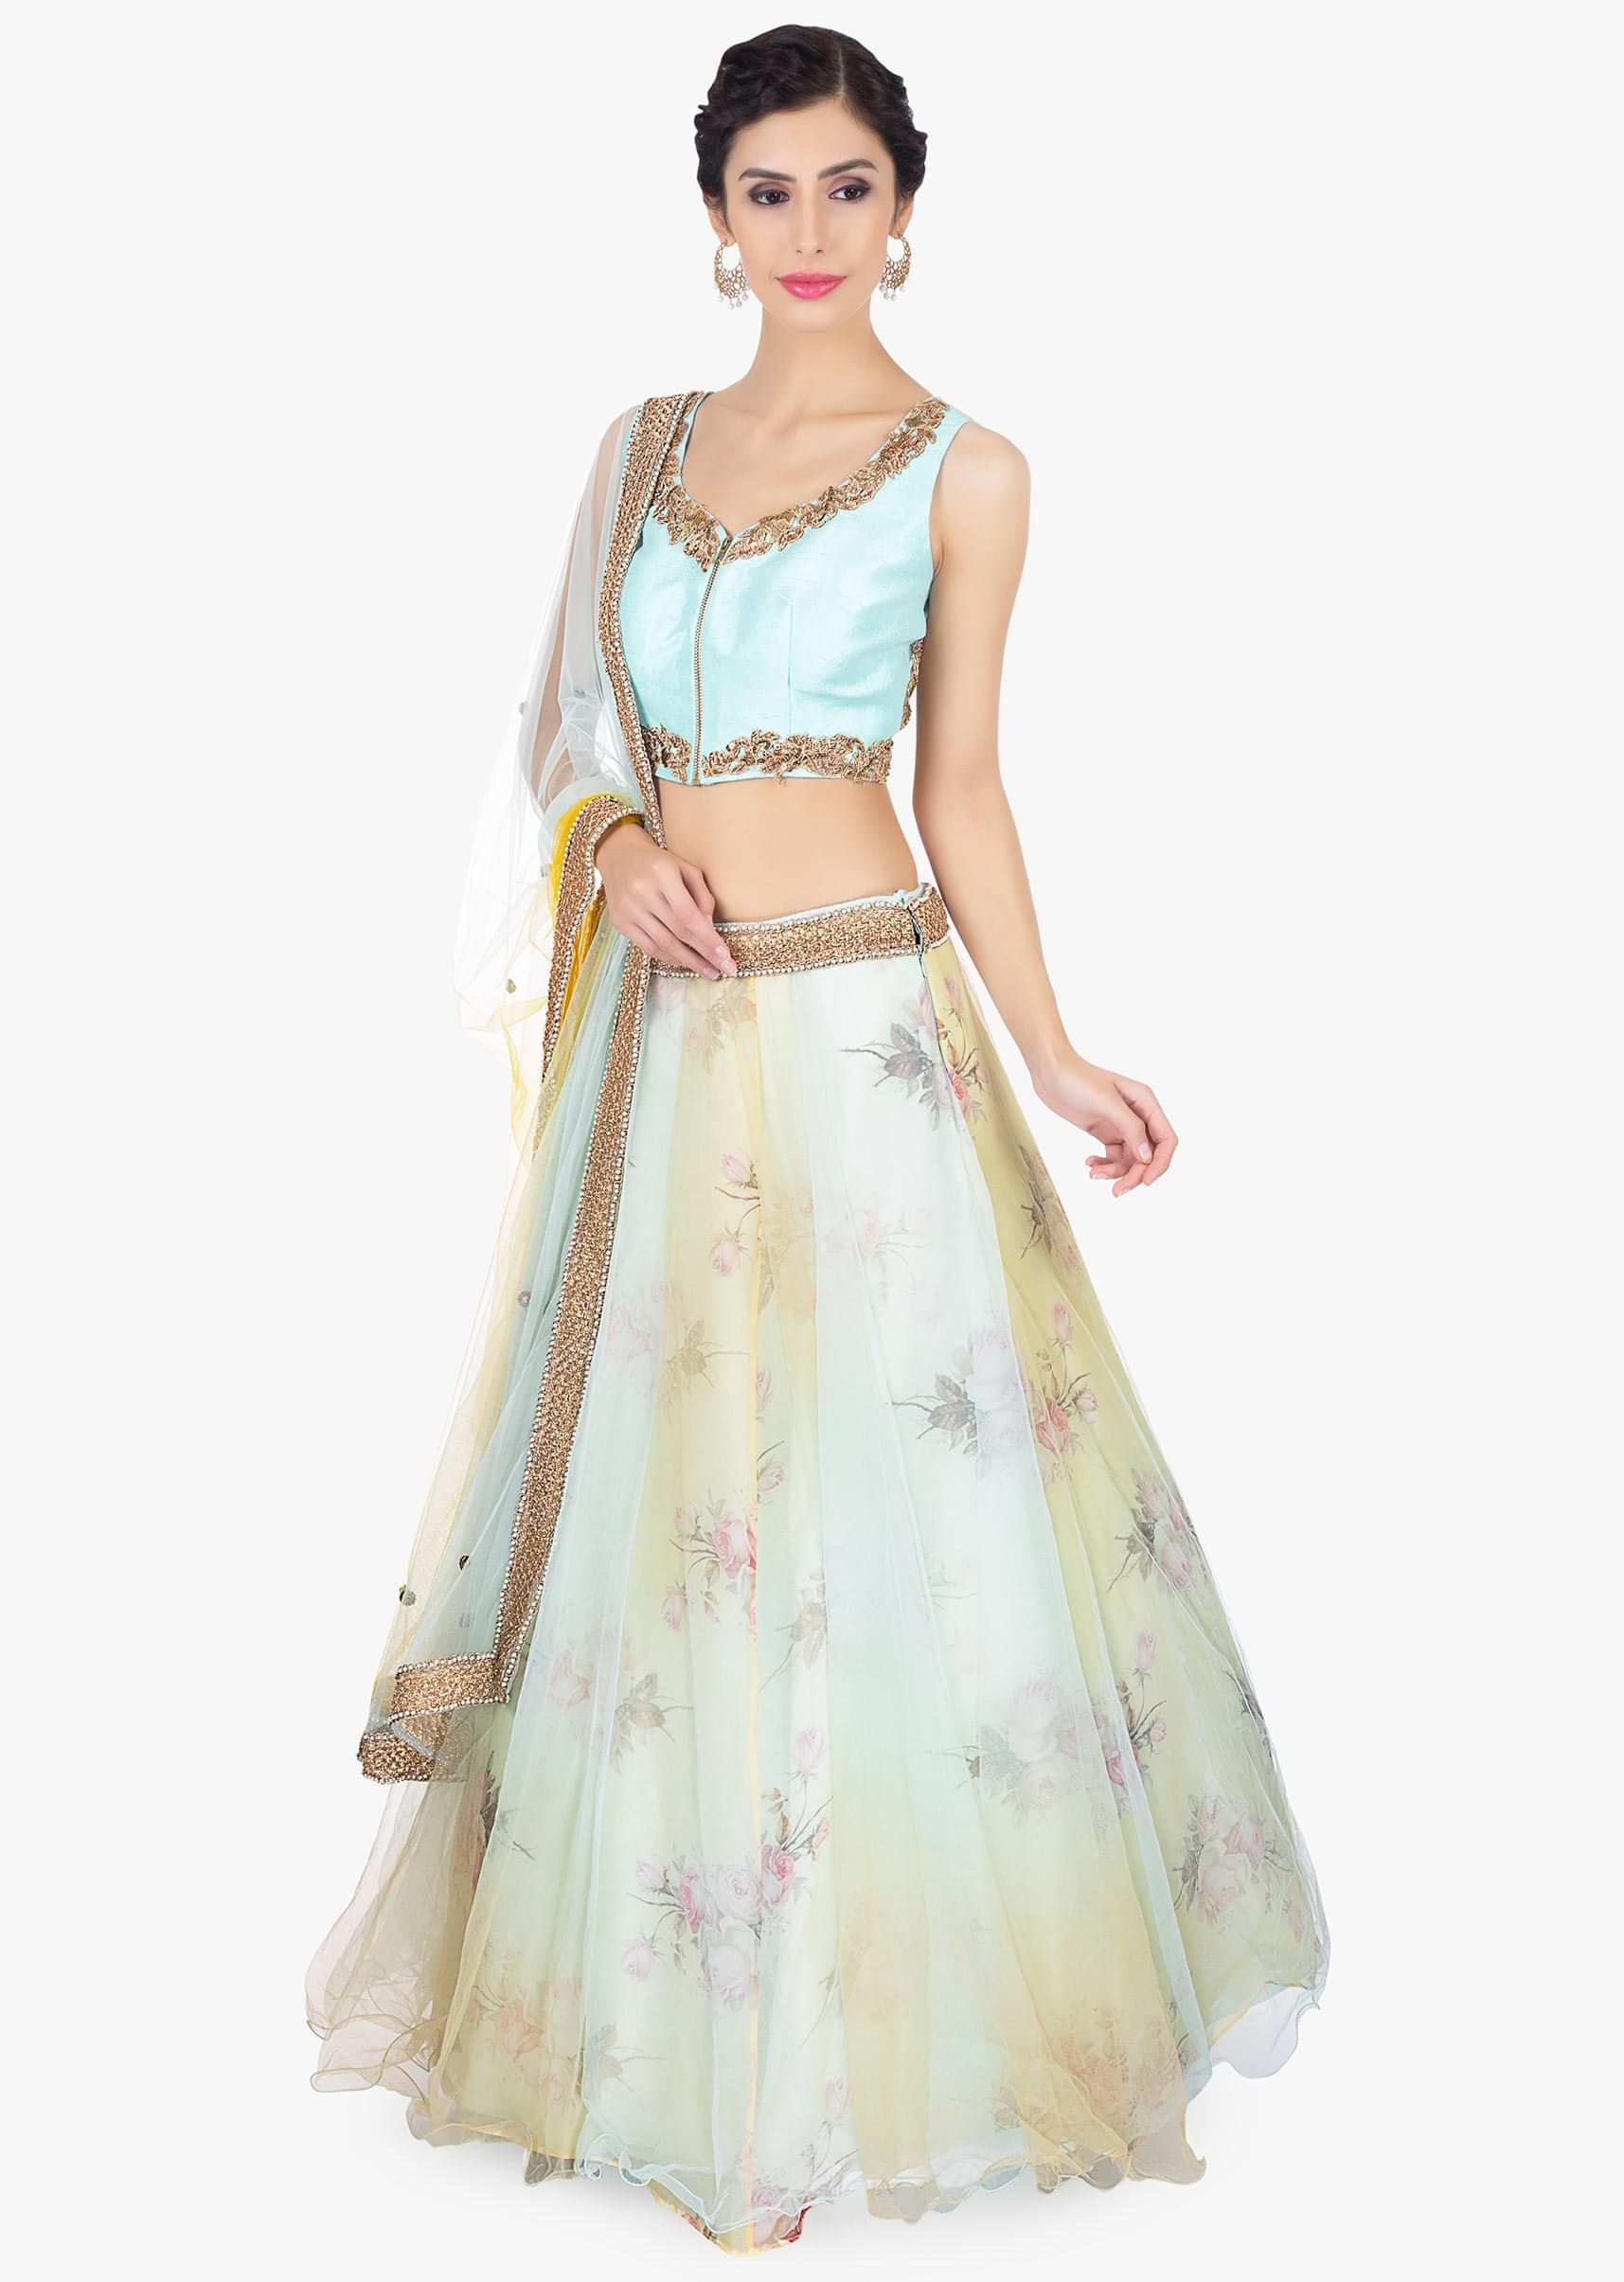 Floral printed organza lehenga with net top layer paired with a mint blouse and net dupatta 